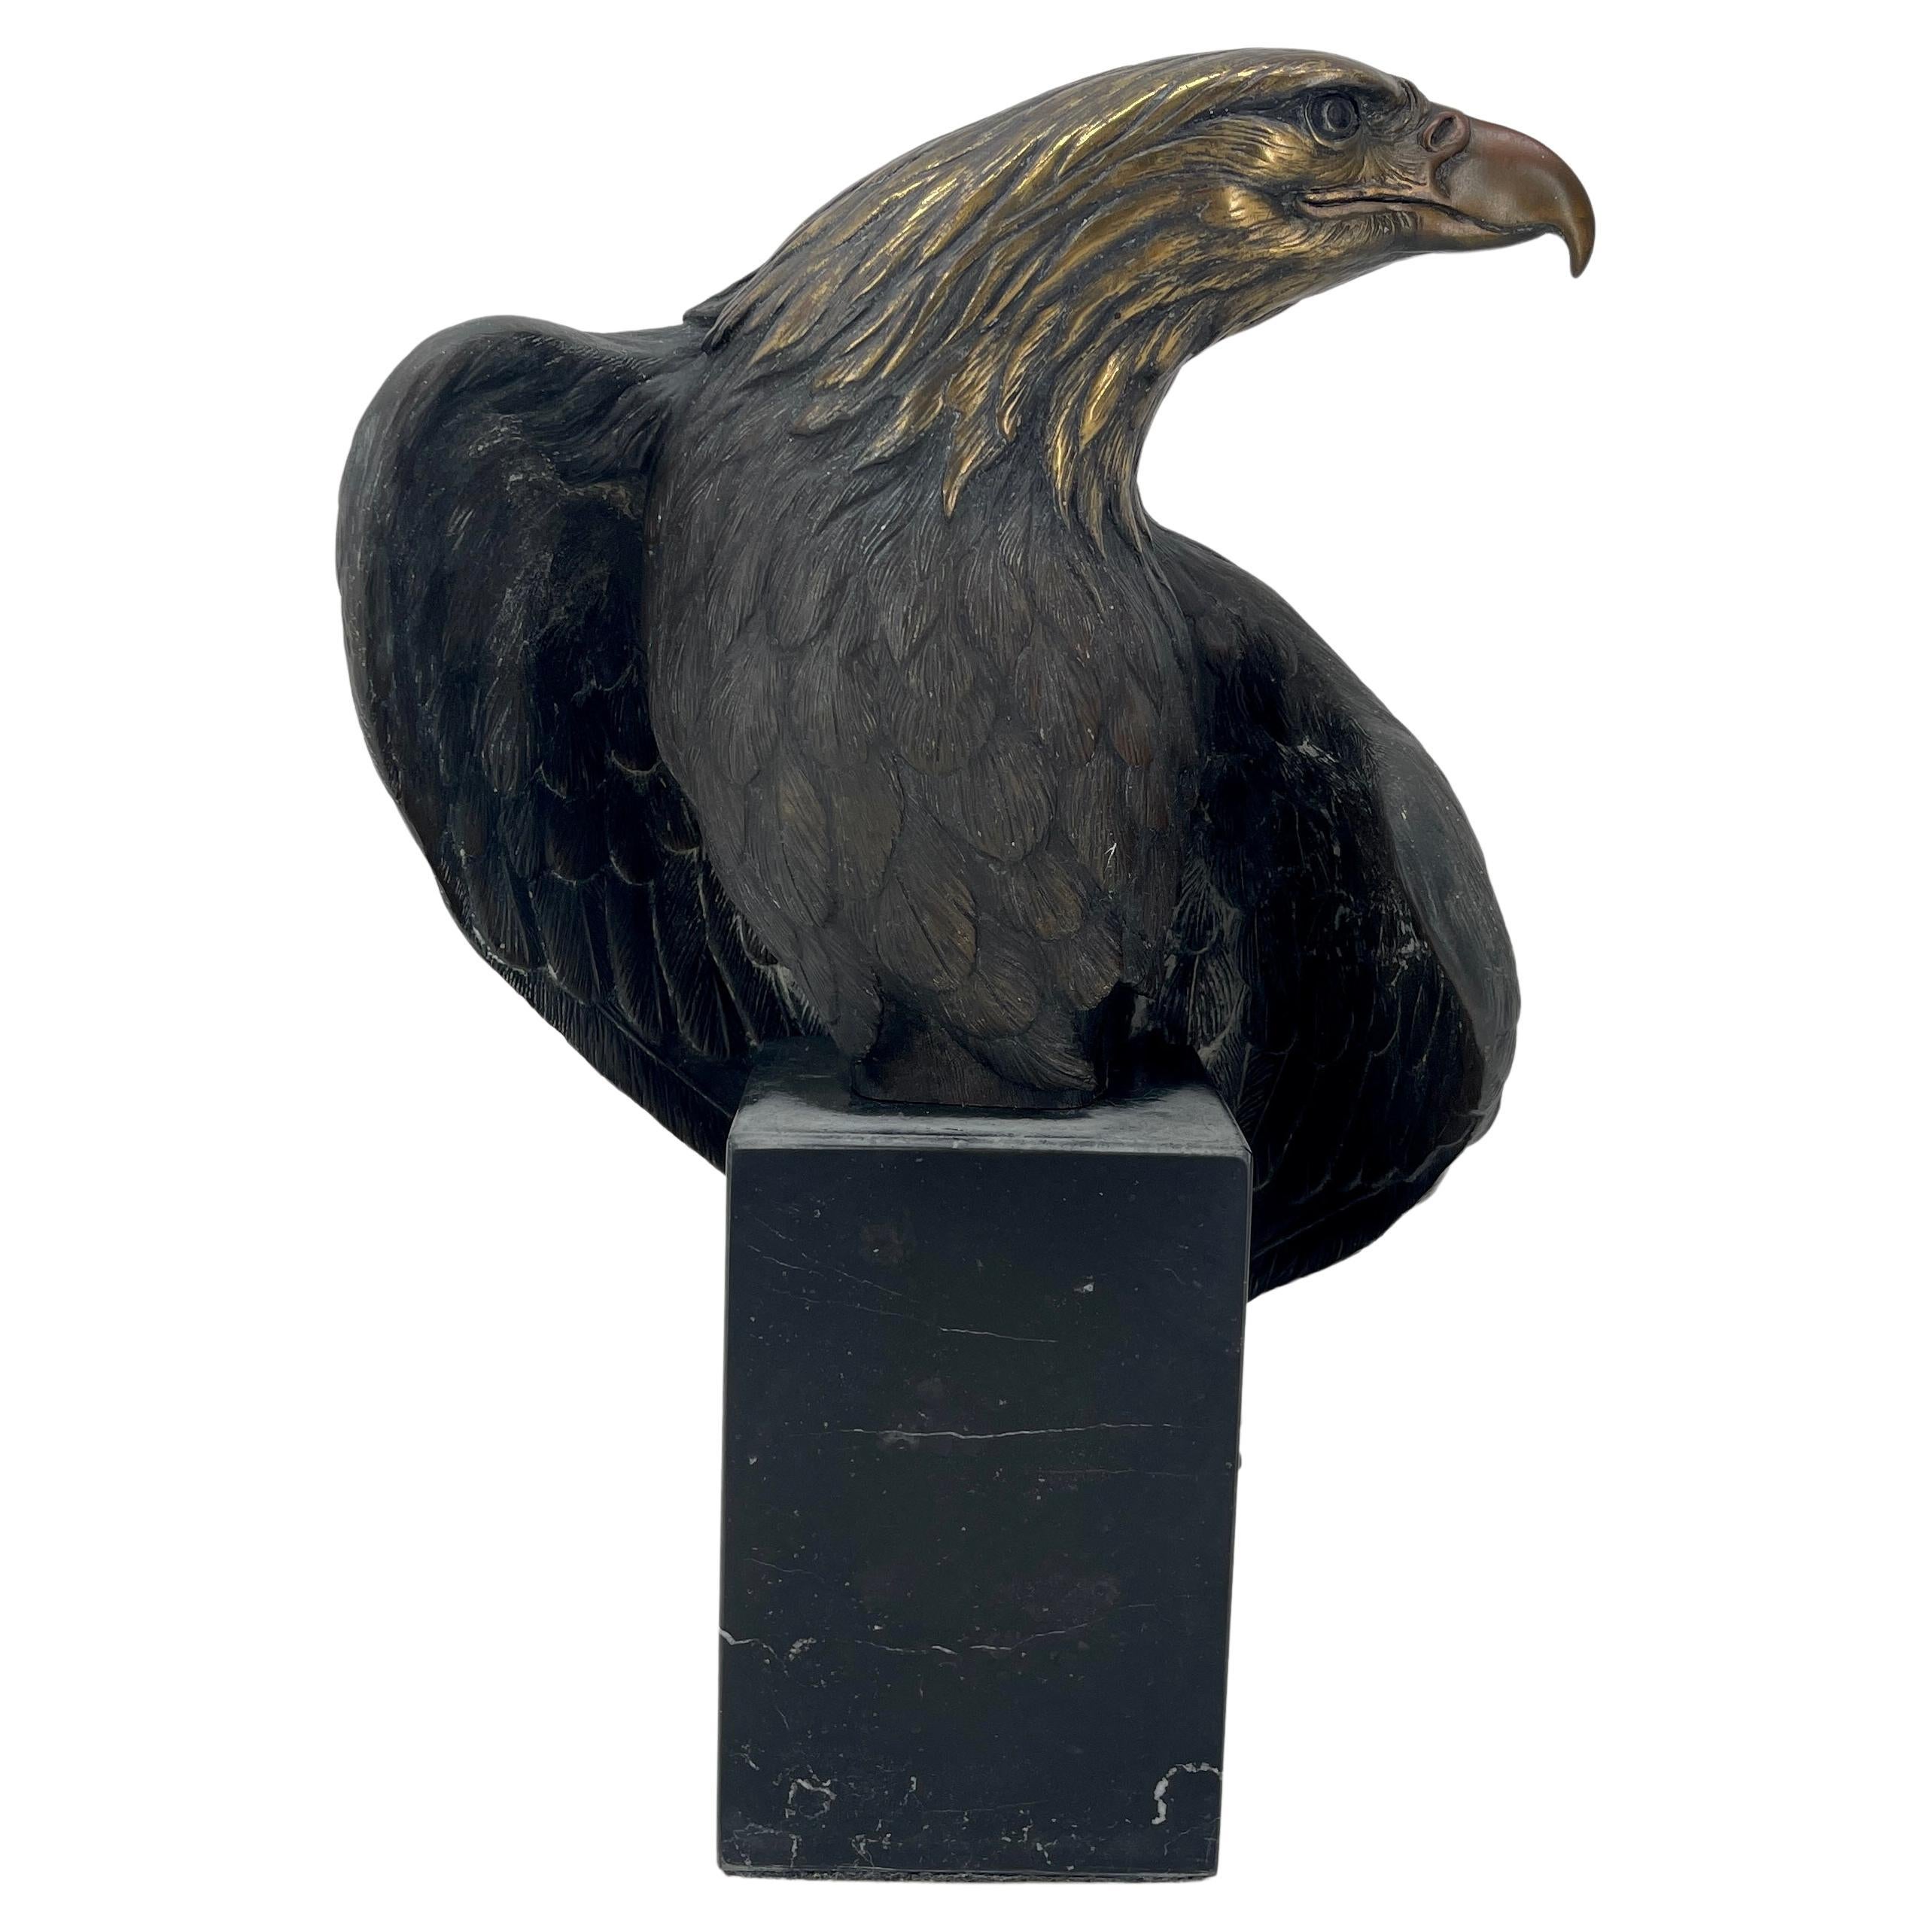 Large French Eagle on a Belgian Black Marble Stand, circa 1880-1900.
This amazing Eagle sculpture is made in a solid bronze that still has the original patina, with a unbeatable age-appropriate wear to the eagles head and shoulder area due to years